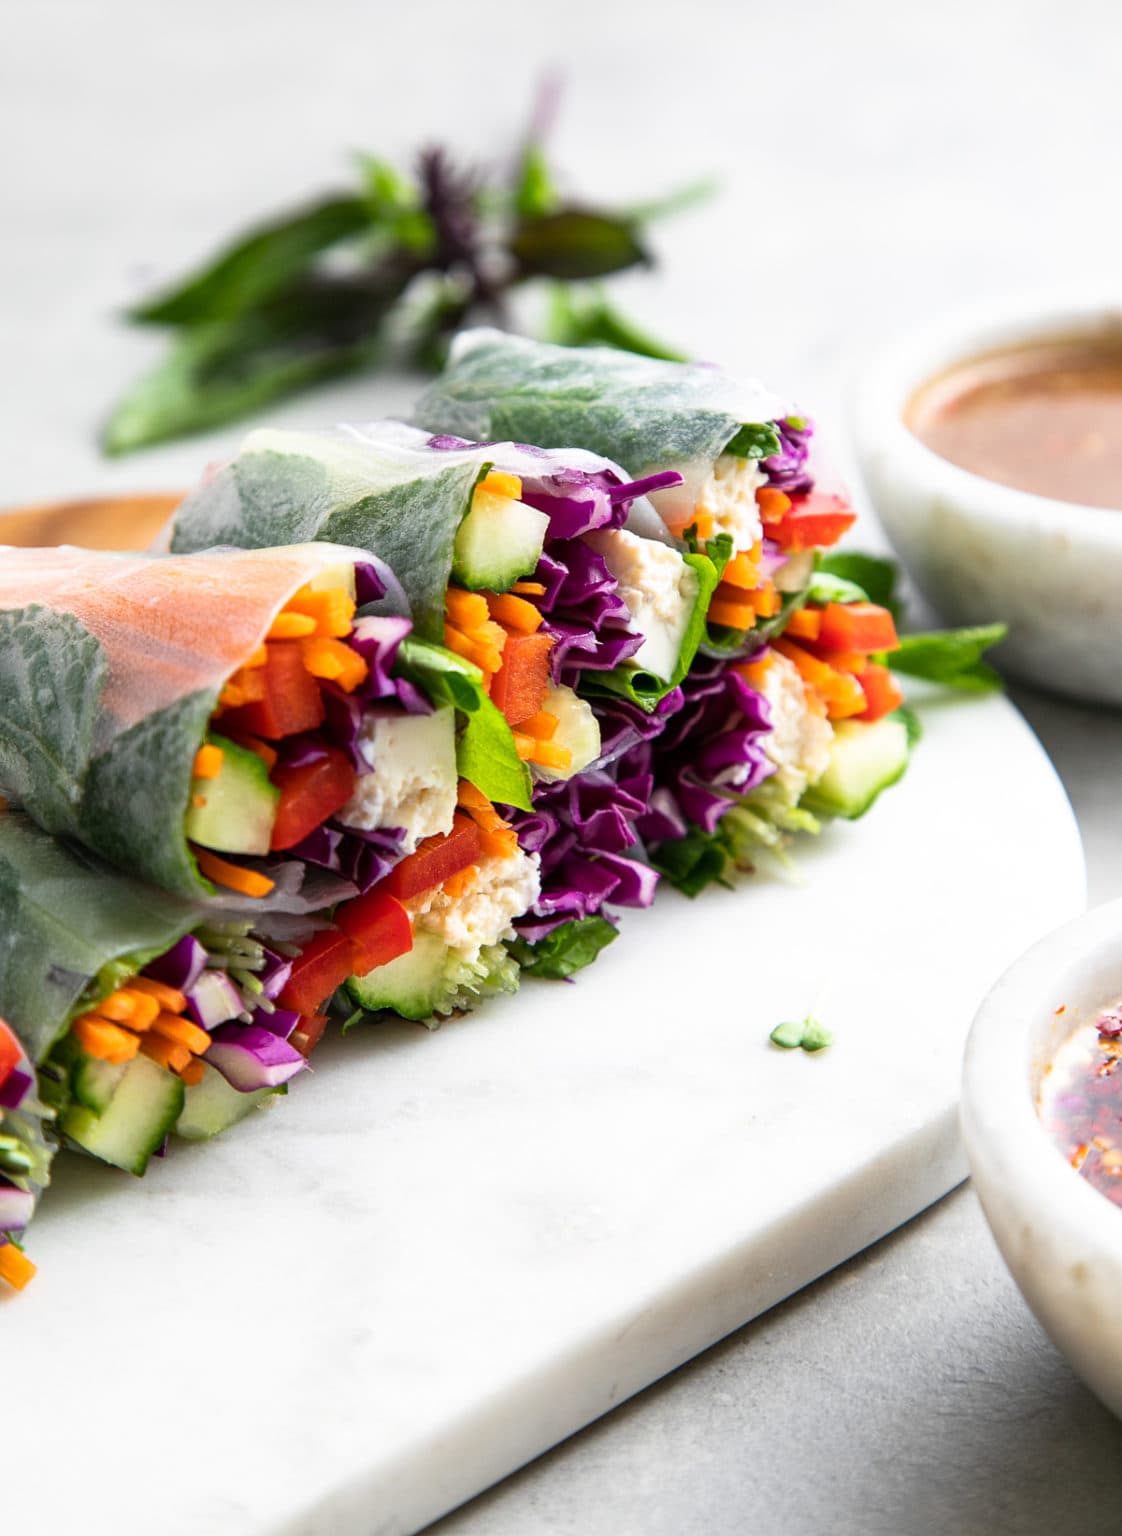 Summer Rolls + Two Dipping Sauces - The Simple Veganista